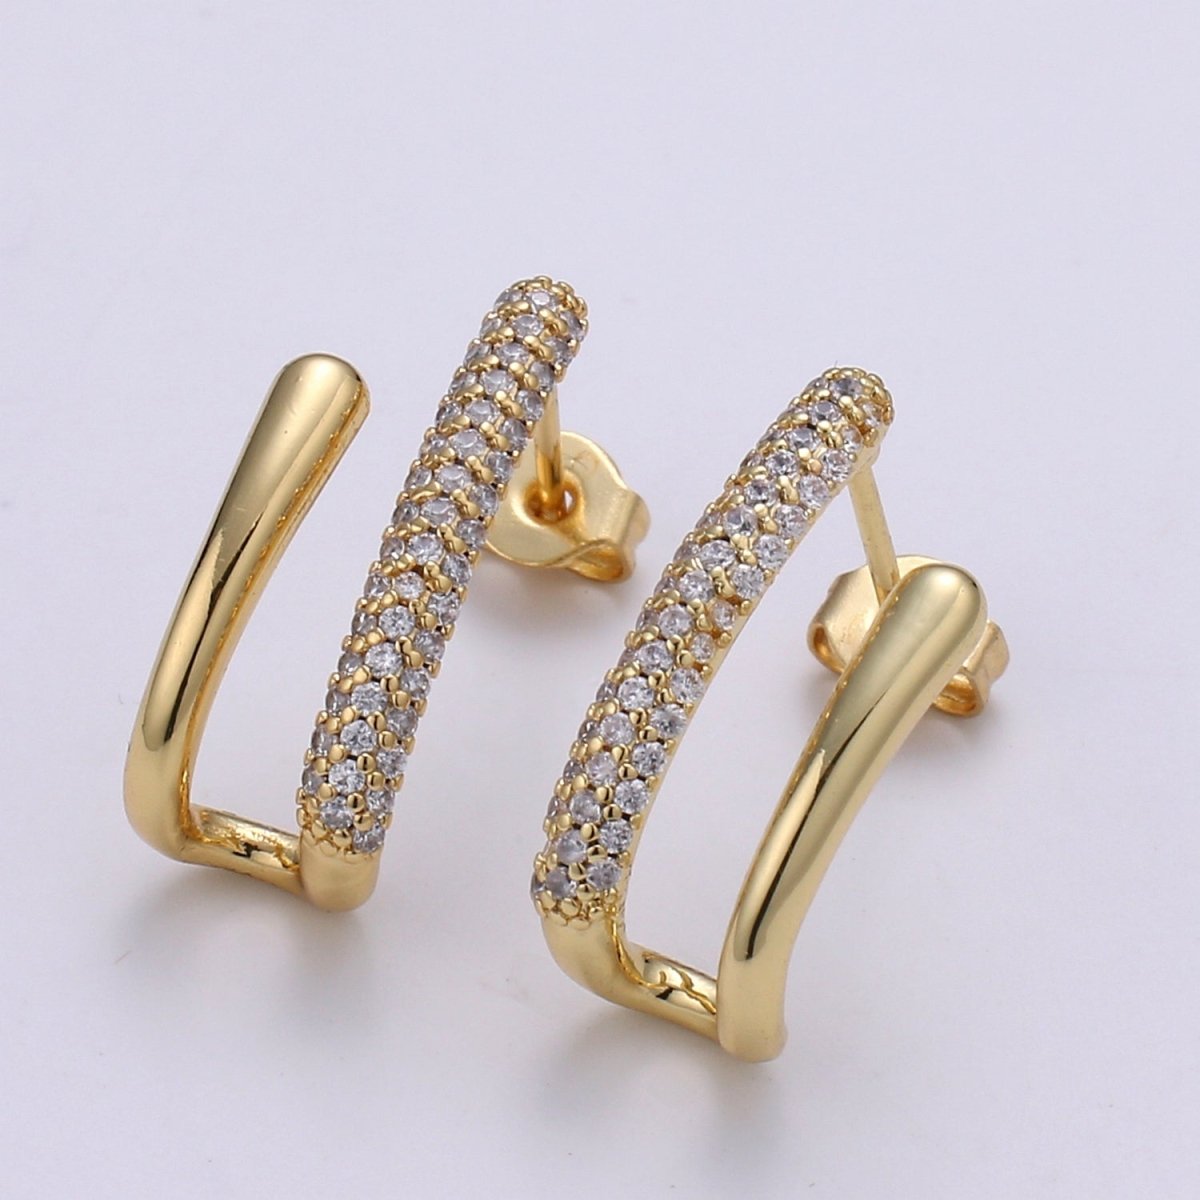 U Shape 24K Gold filled CZ Pave Stud, White Gold filled Micro Pave Earring for DIY Earring Craft Supply Jewelry Making, EARR-1367, 1368 Q-389 Q-390 - DLUXCA